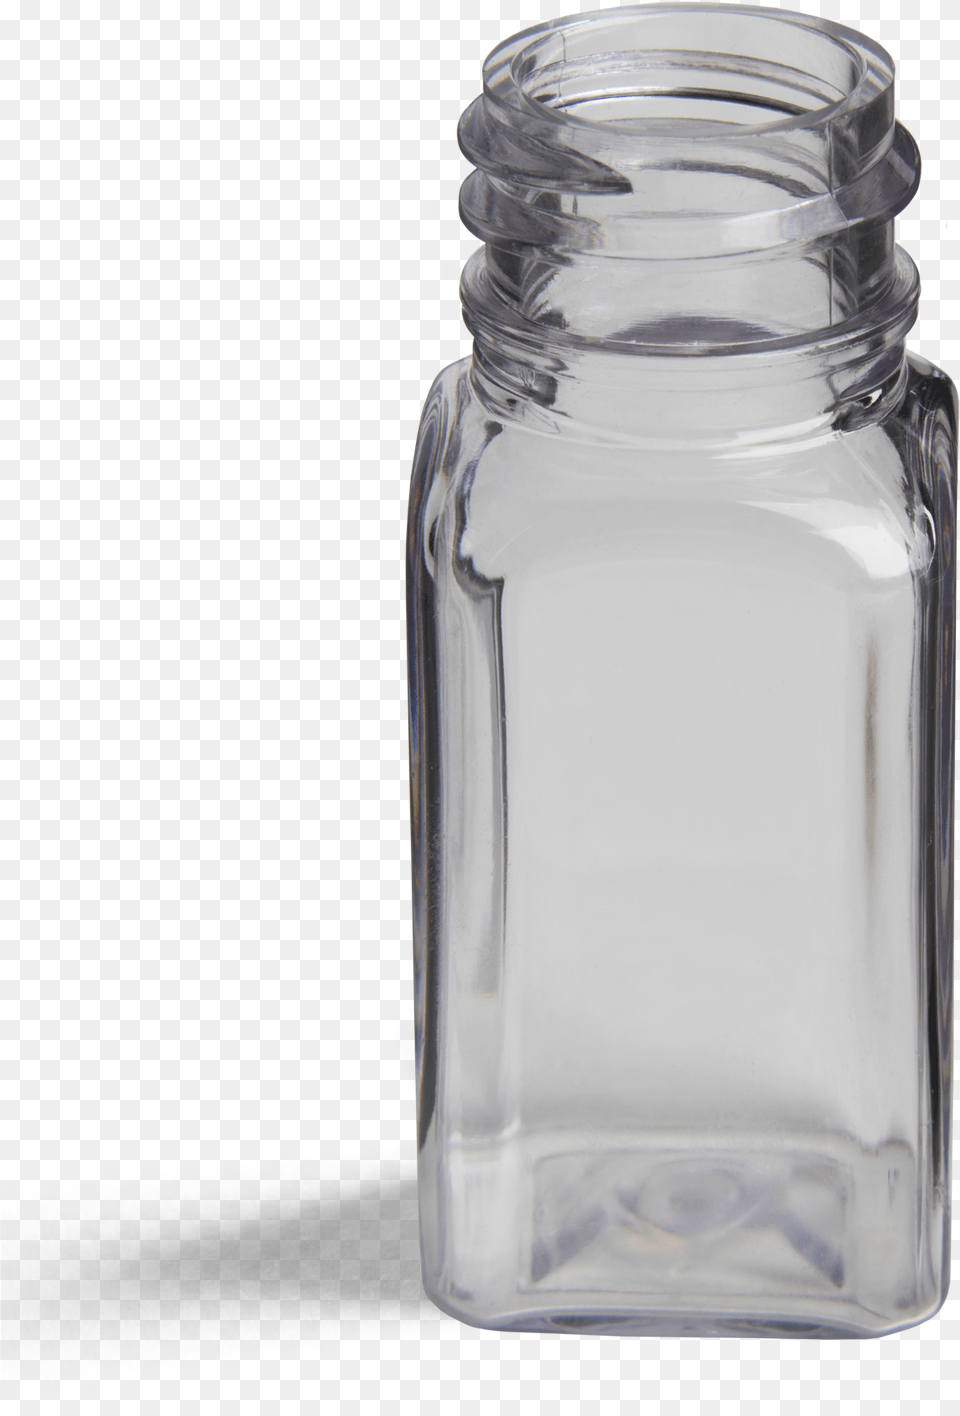 Oz French Square Glass Bottle, Jar, Shaker Free Png